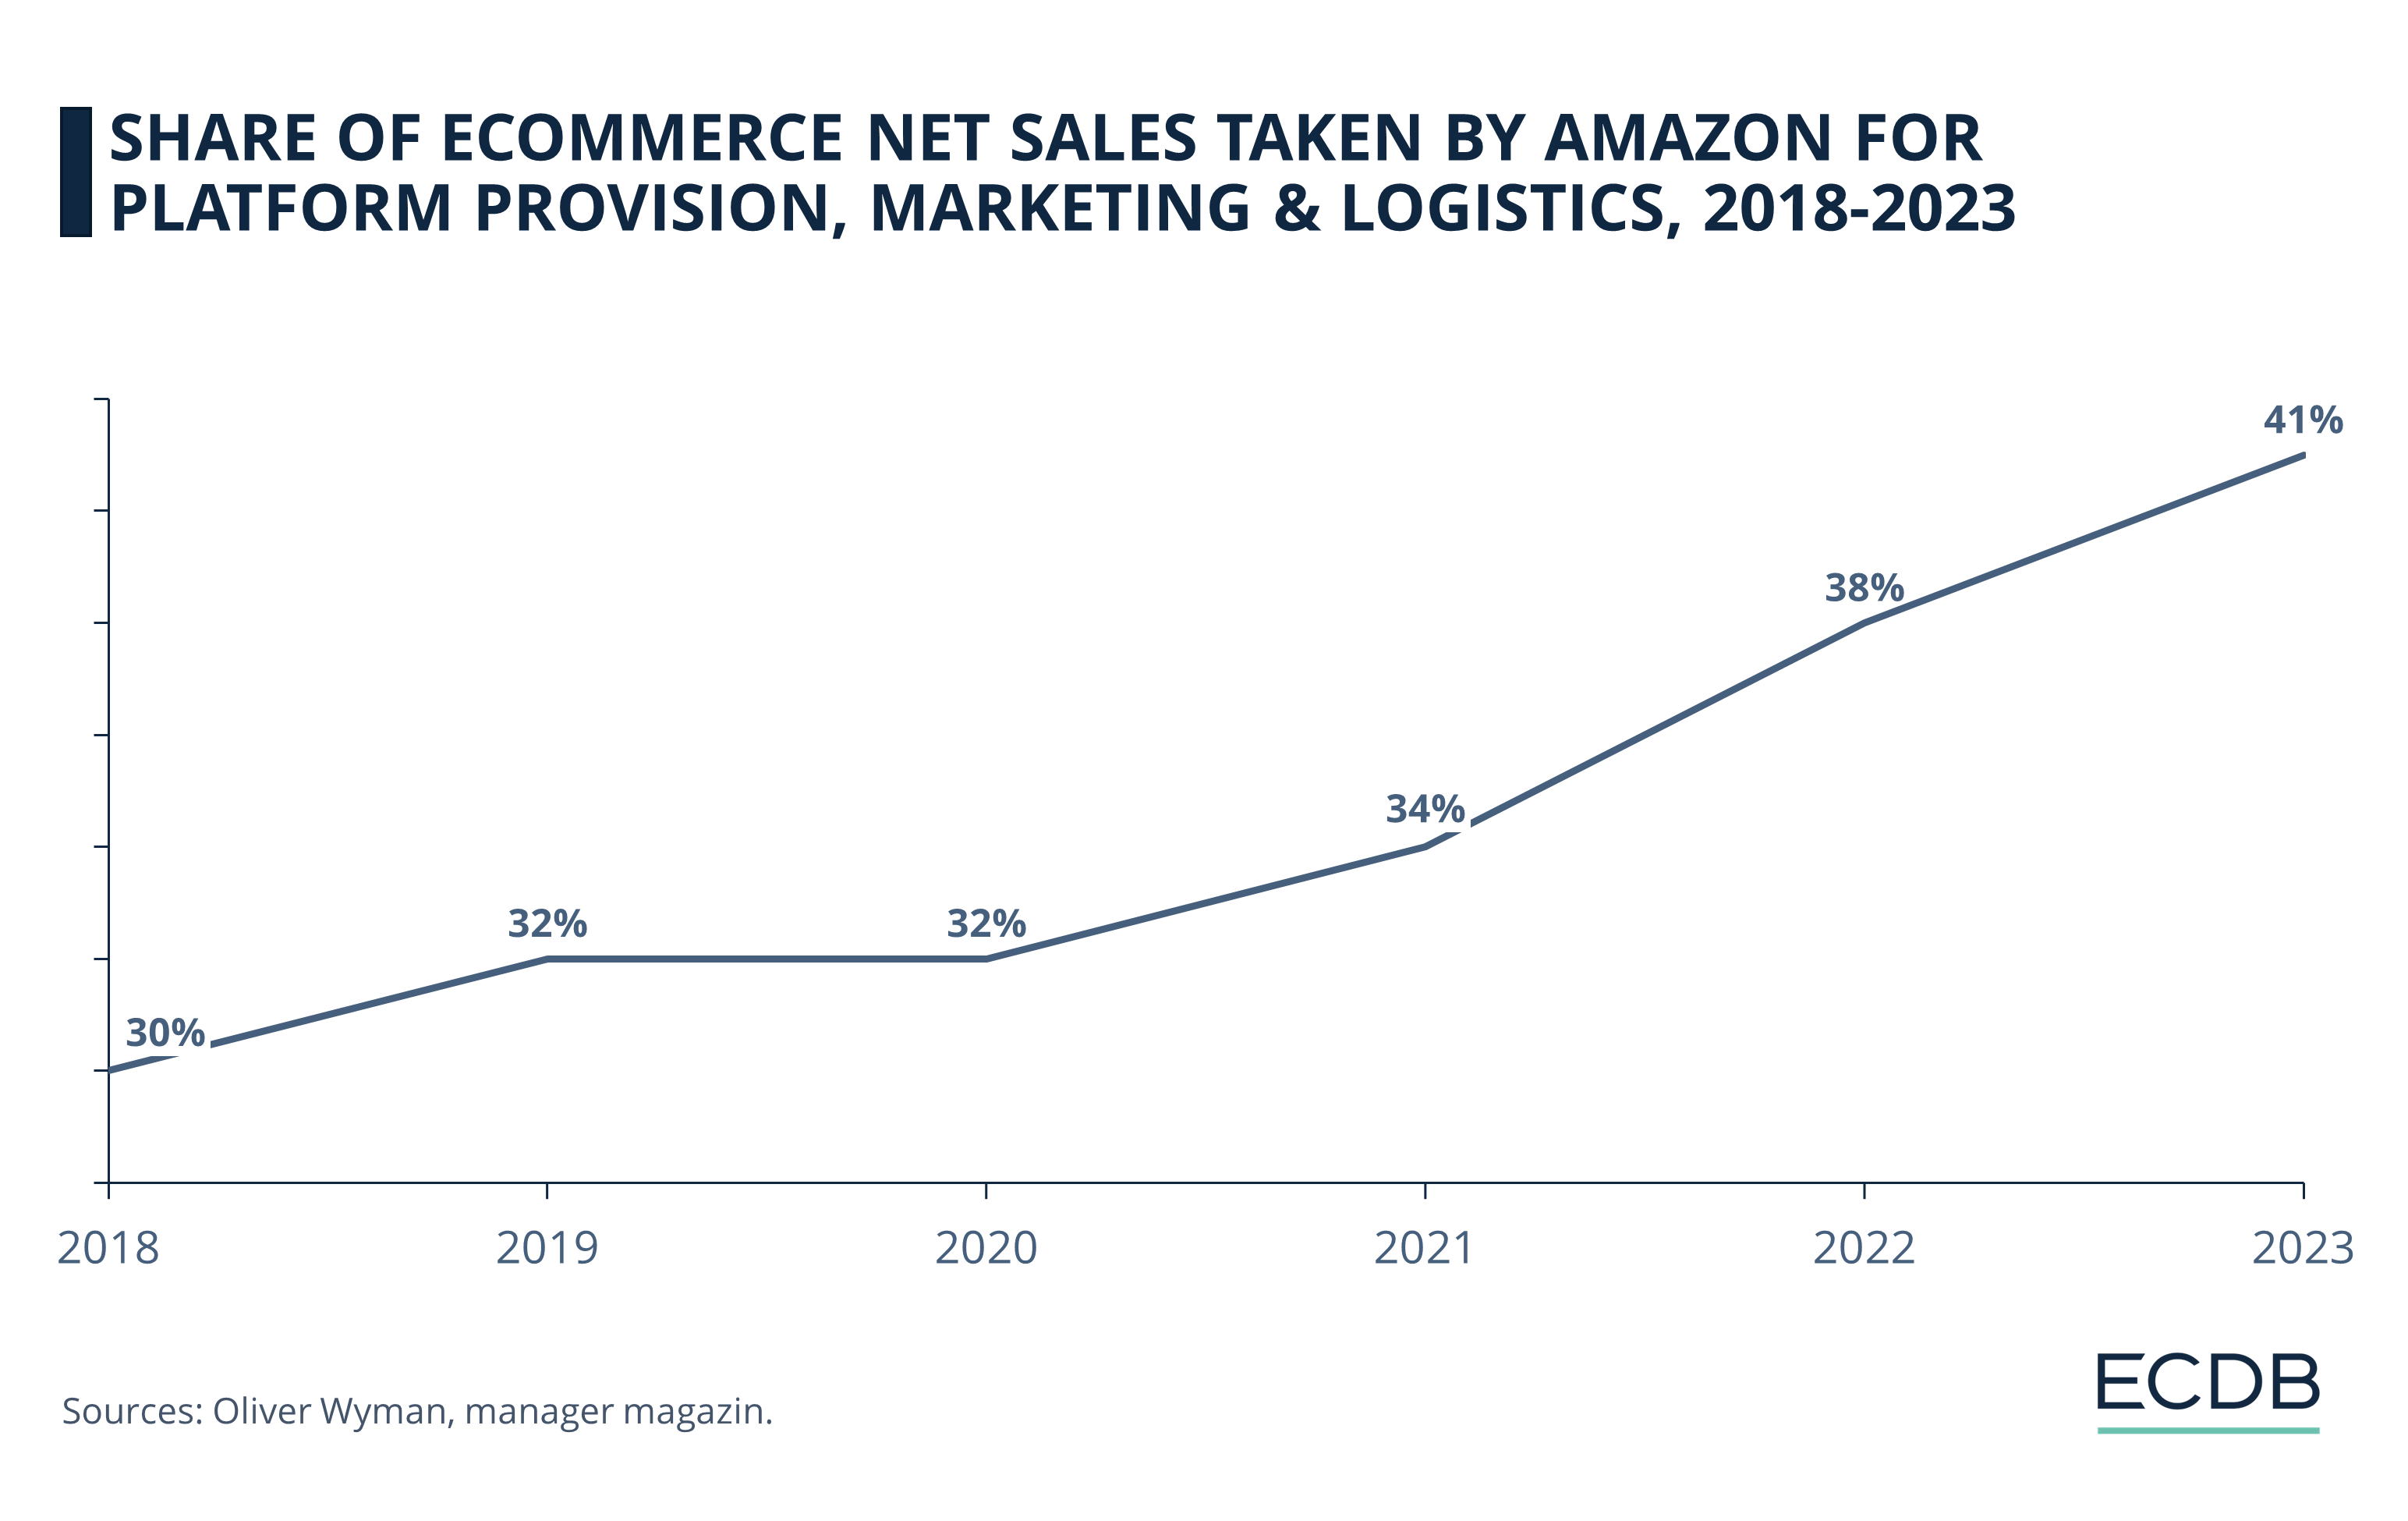 Share of eCommerce Net Sales Taken by Amazon for Platform Provision, Marketing & Logistics, 2018-2023